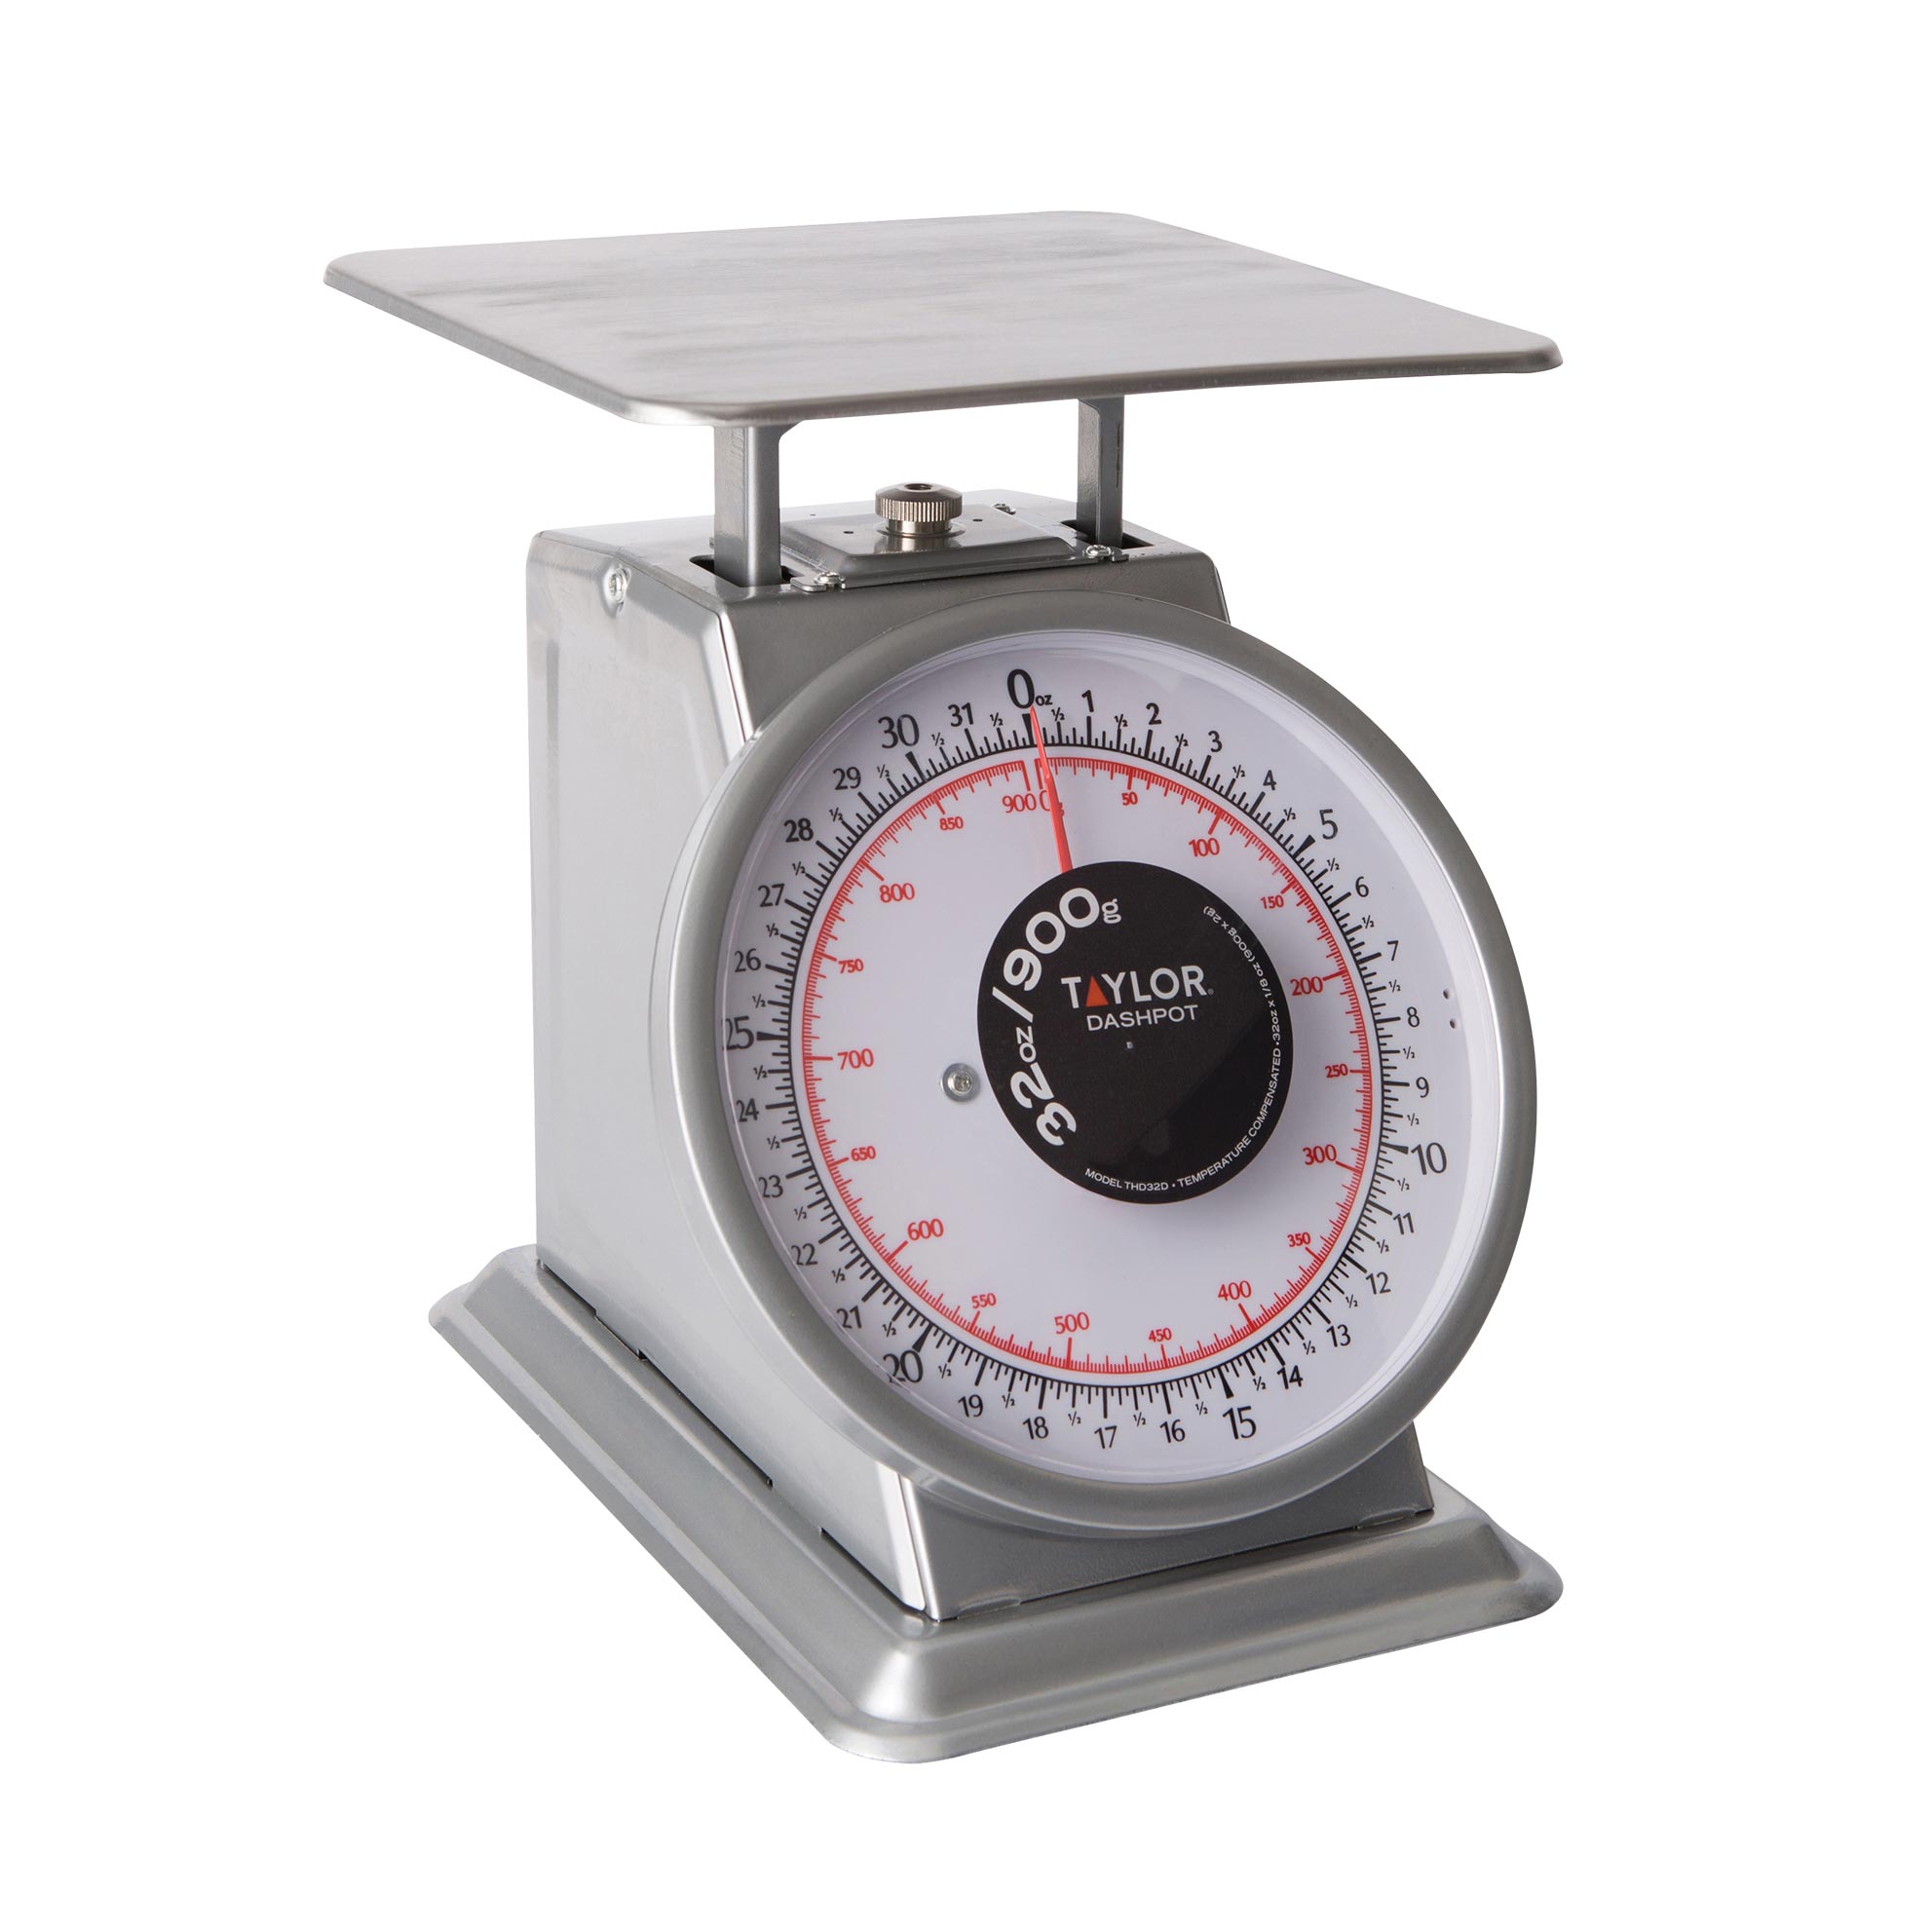 What to Know About Portion-Control Scales - Foodservice Equipment Reports  Magazine